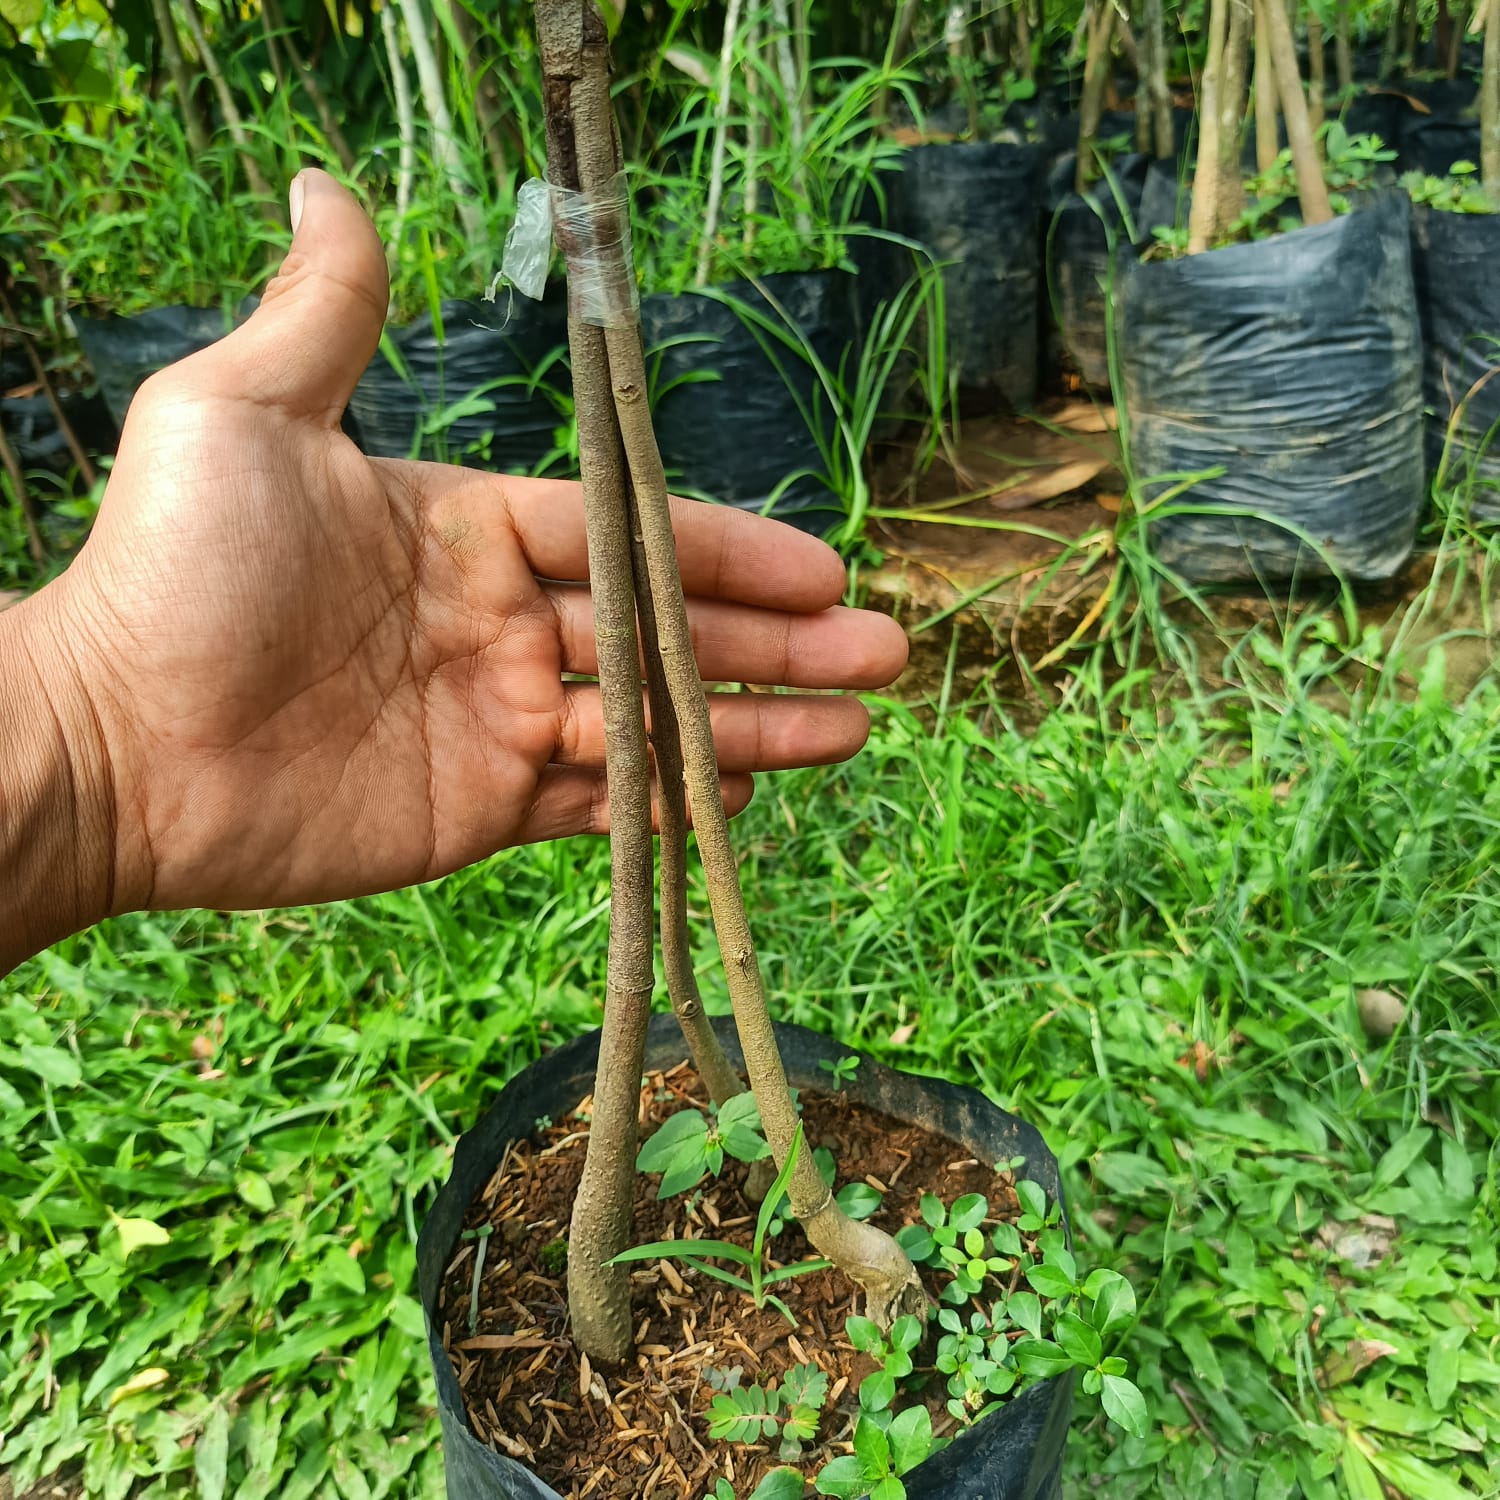 DURIO Musang King Three Rootstock Grafted Seedlings